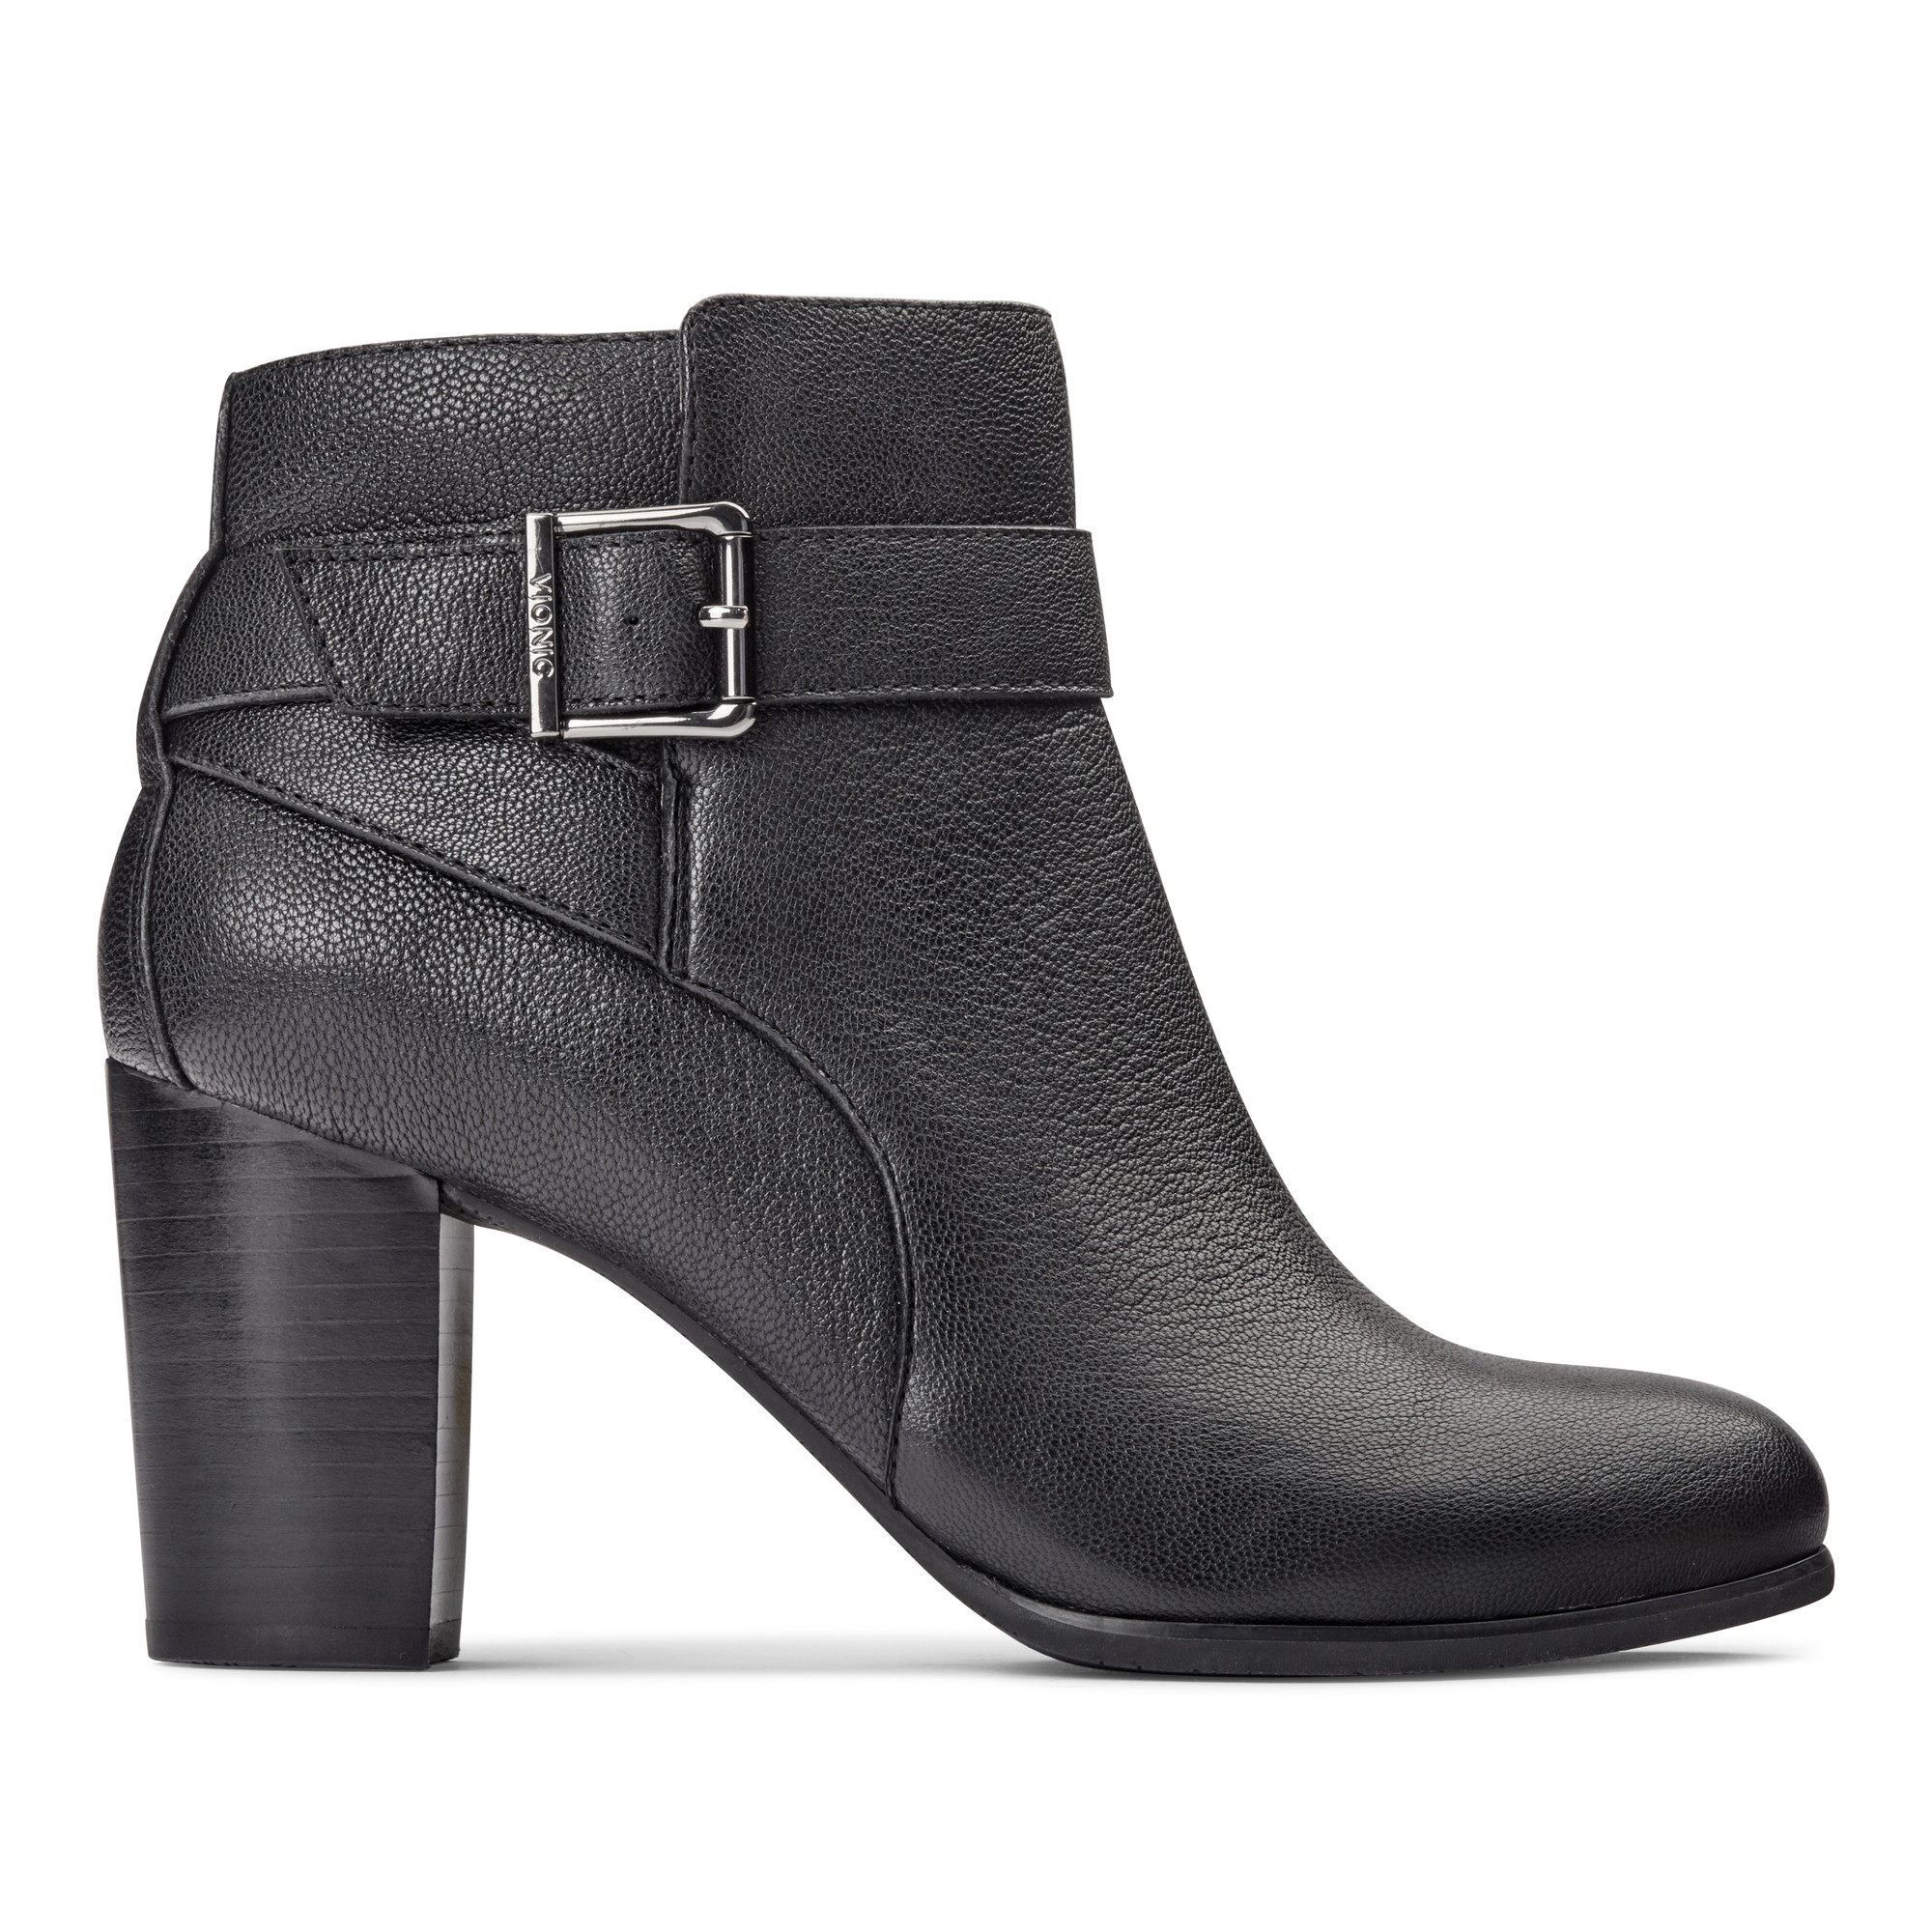 Shop The Alison Ankle Boot